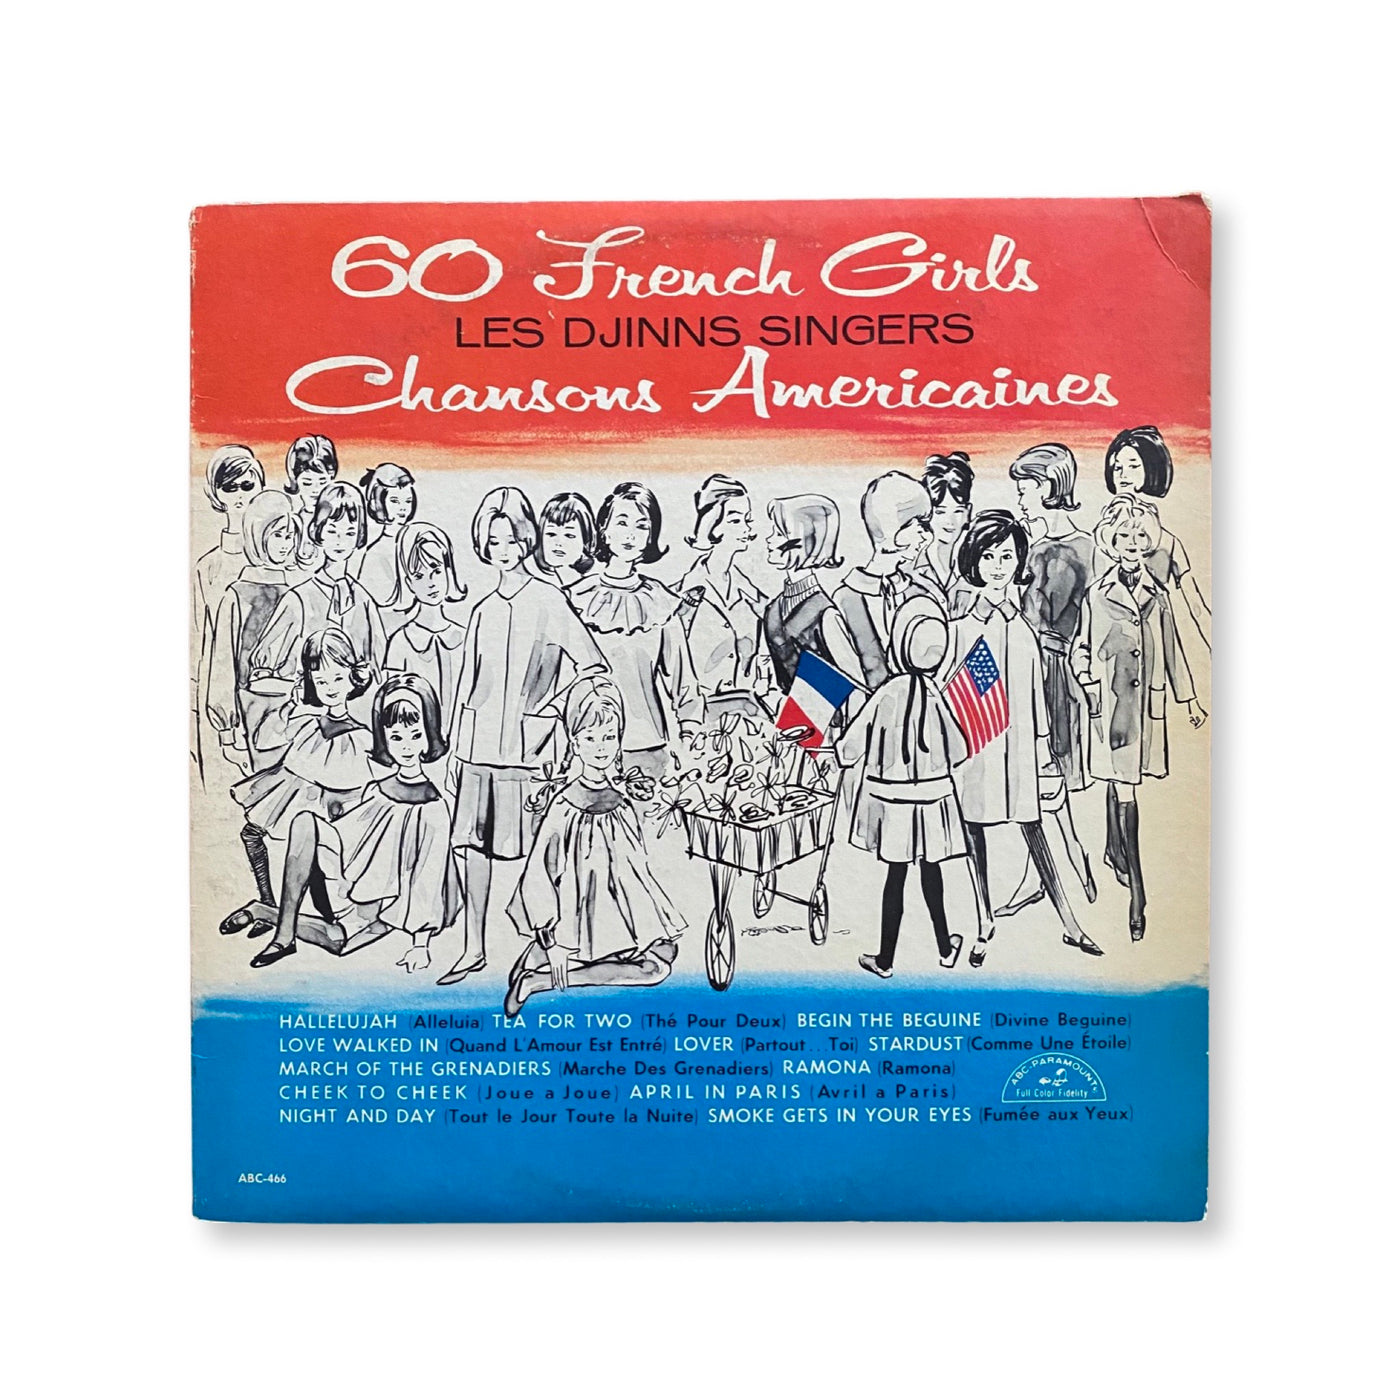 Les Djinns - 60 French Girls - Chansons Americaines